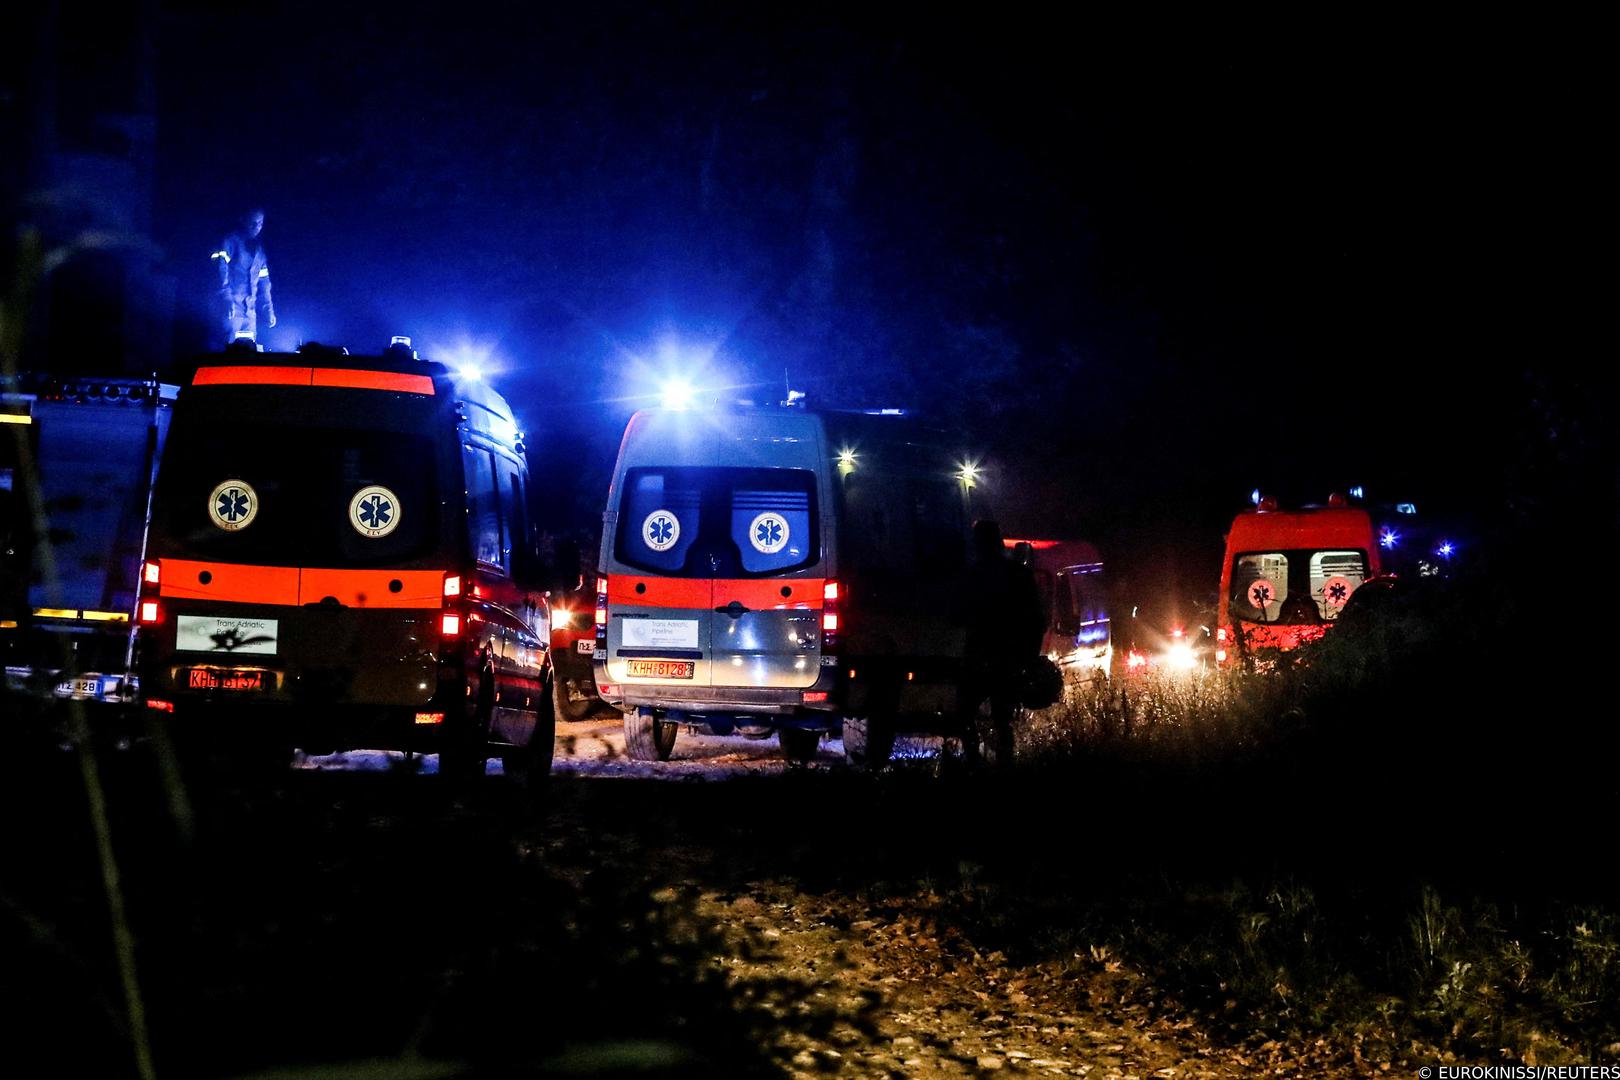 Ambulances are seen at the crash site of an Antonov An-12 cargo plane owned by a Ukrainian company, near Kavala, Greece, July 16, 2022. Laskaris Tsotsas/Eurokinissi via REUTERS ATTENTION EDITORS. THIS IMAGE HAS BEEN PROVIDED BY A THIRD PARTY. NO RESALES. NO ARCHIVES. NO EDITORIAL SALES IN GREECE Photo: EUROKINISSI/REUTERS